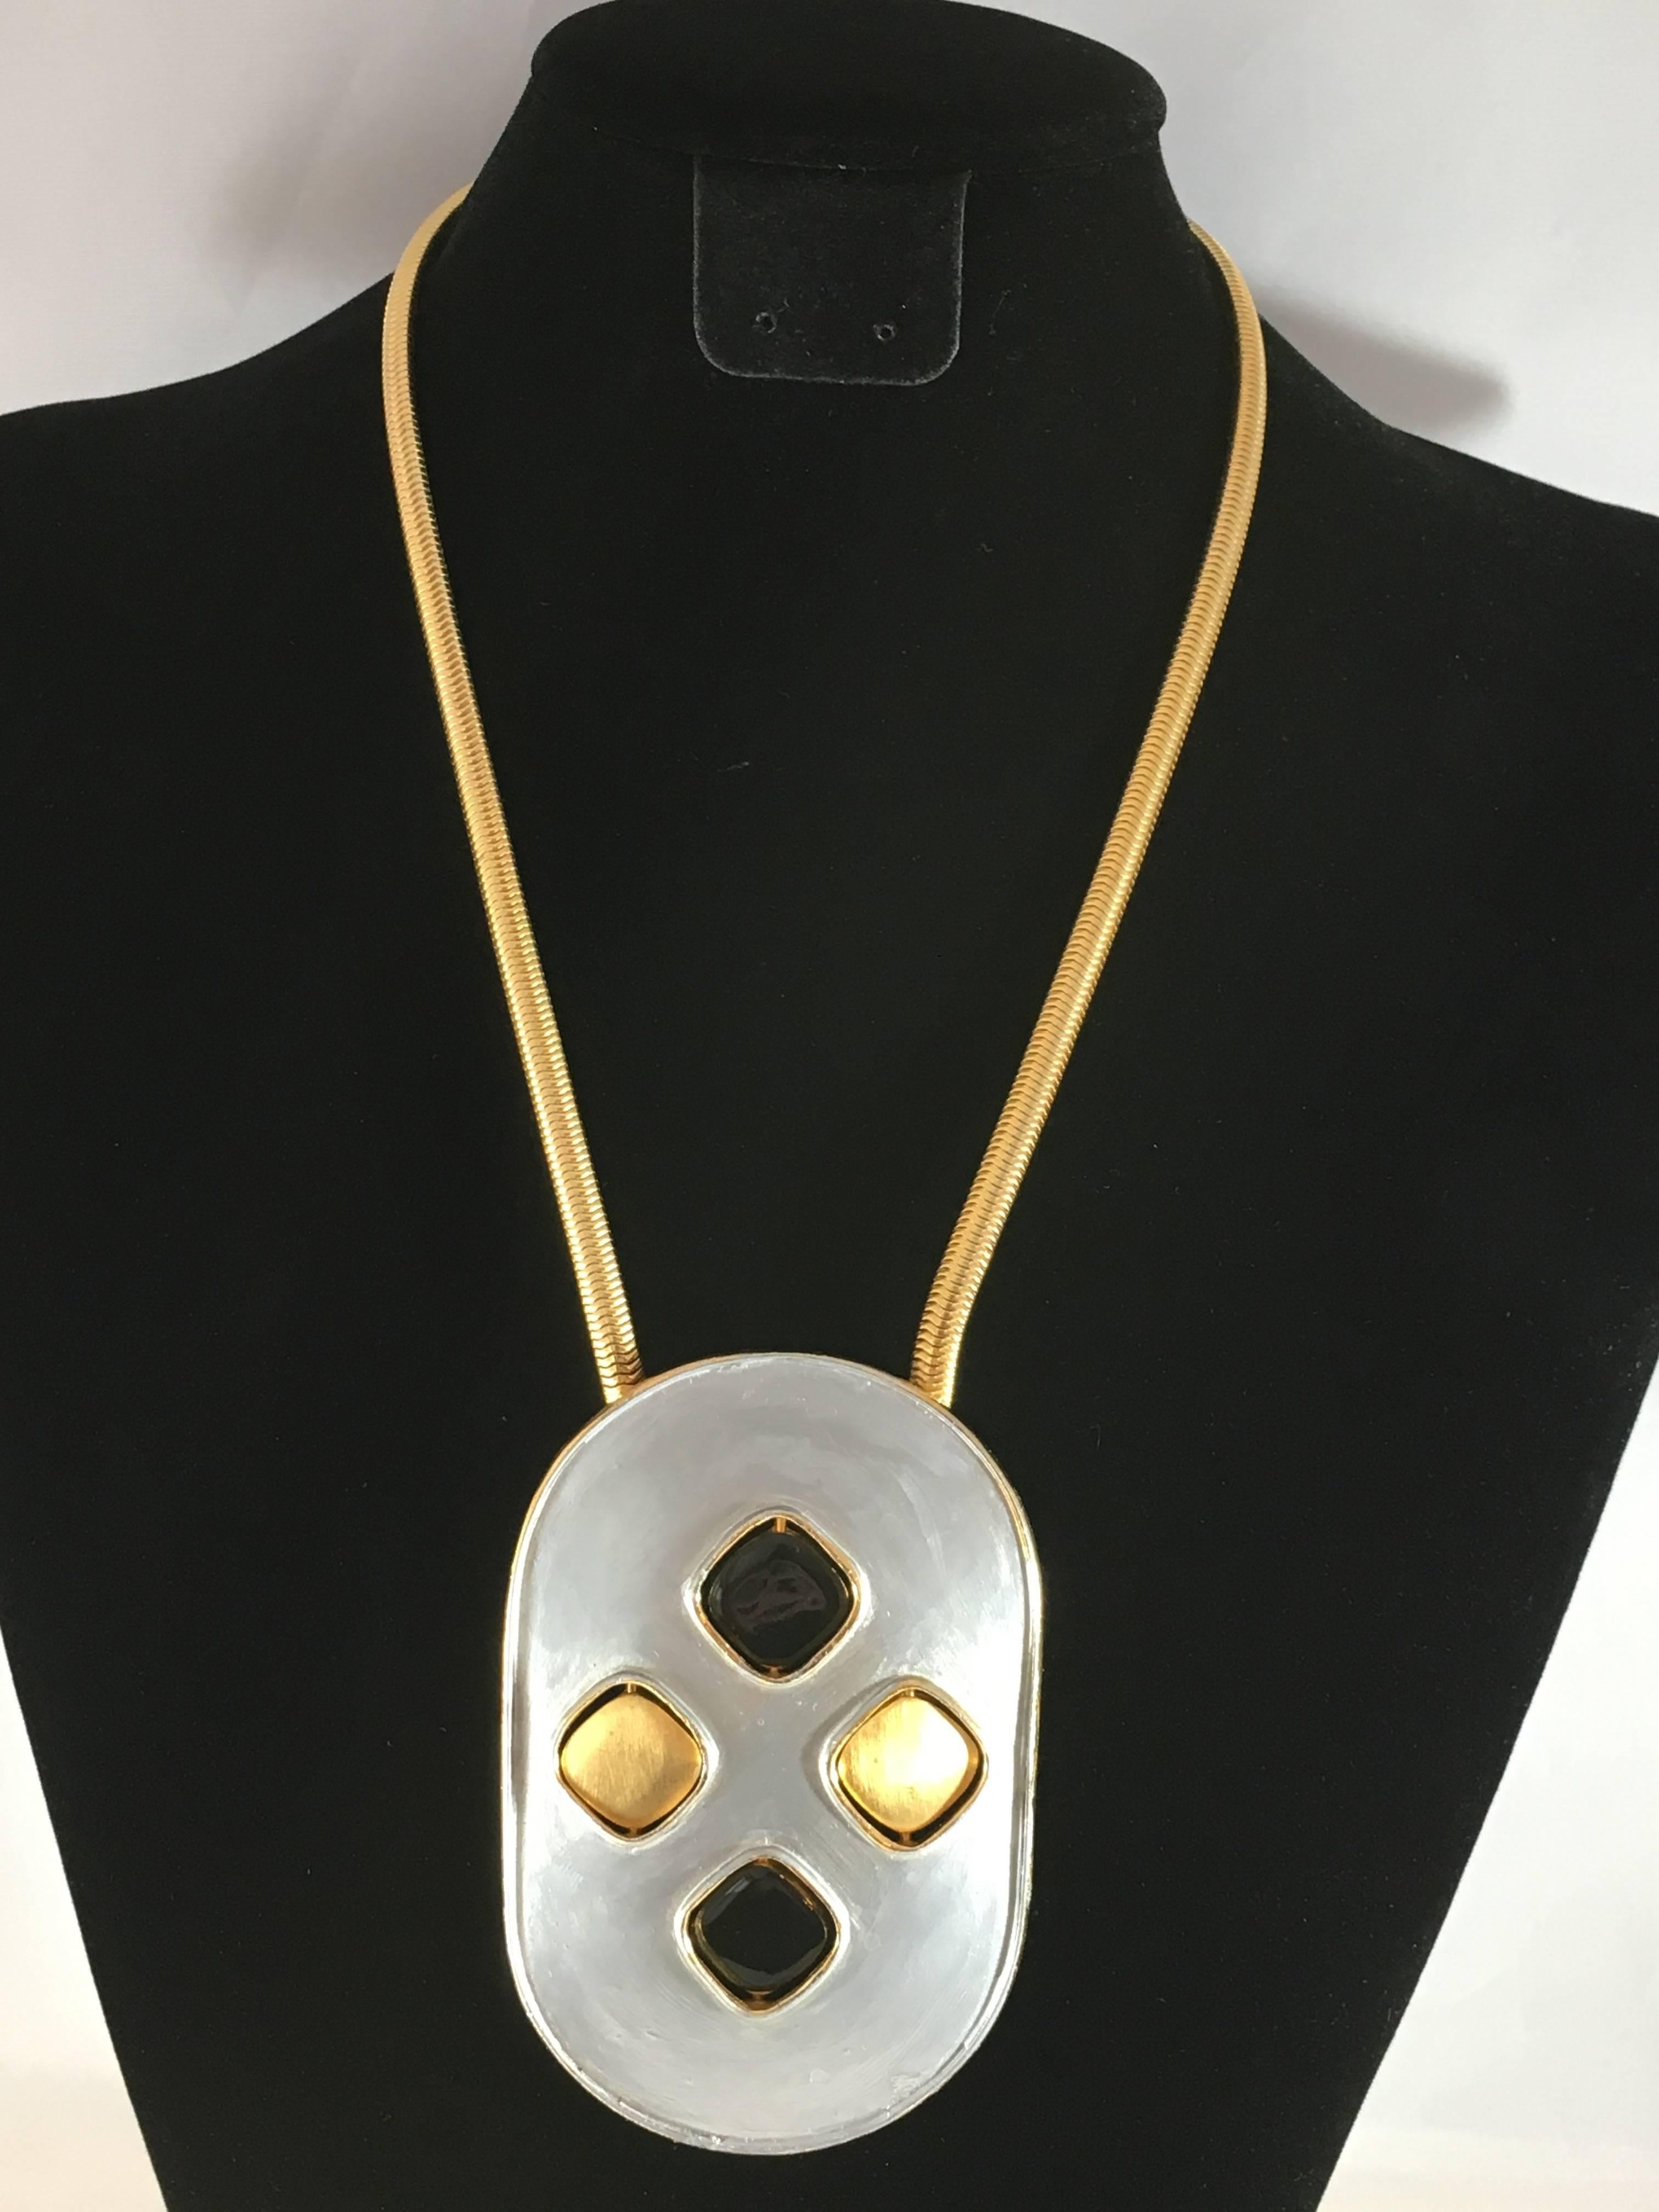 This is a Pierre Cardin pendant necklace from the 1960s. The disks on the pendant are changeable - one side is gold colored and the other side is black enamel. The disks can be worn in many different combination - thus changing the look of the